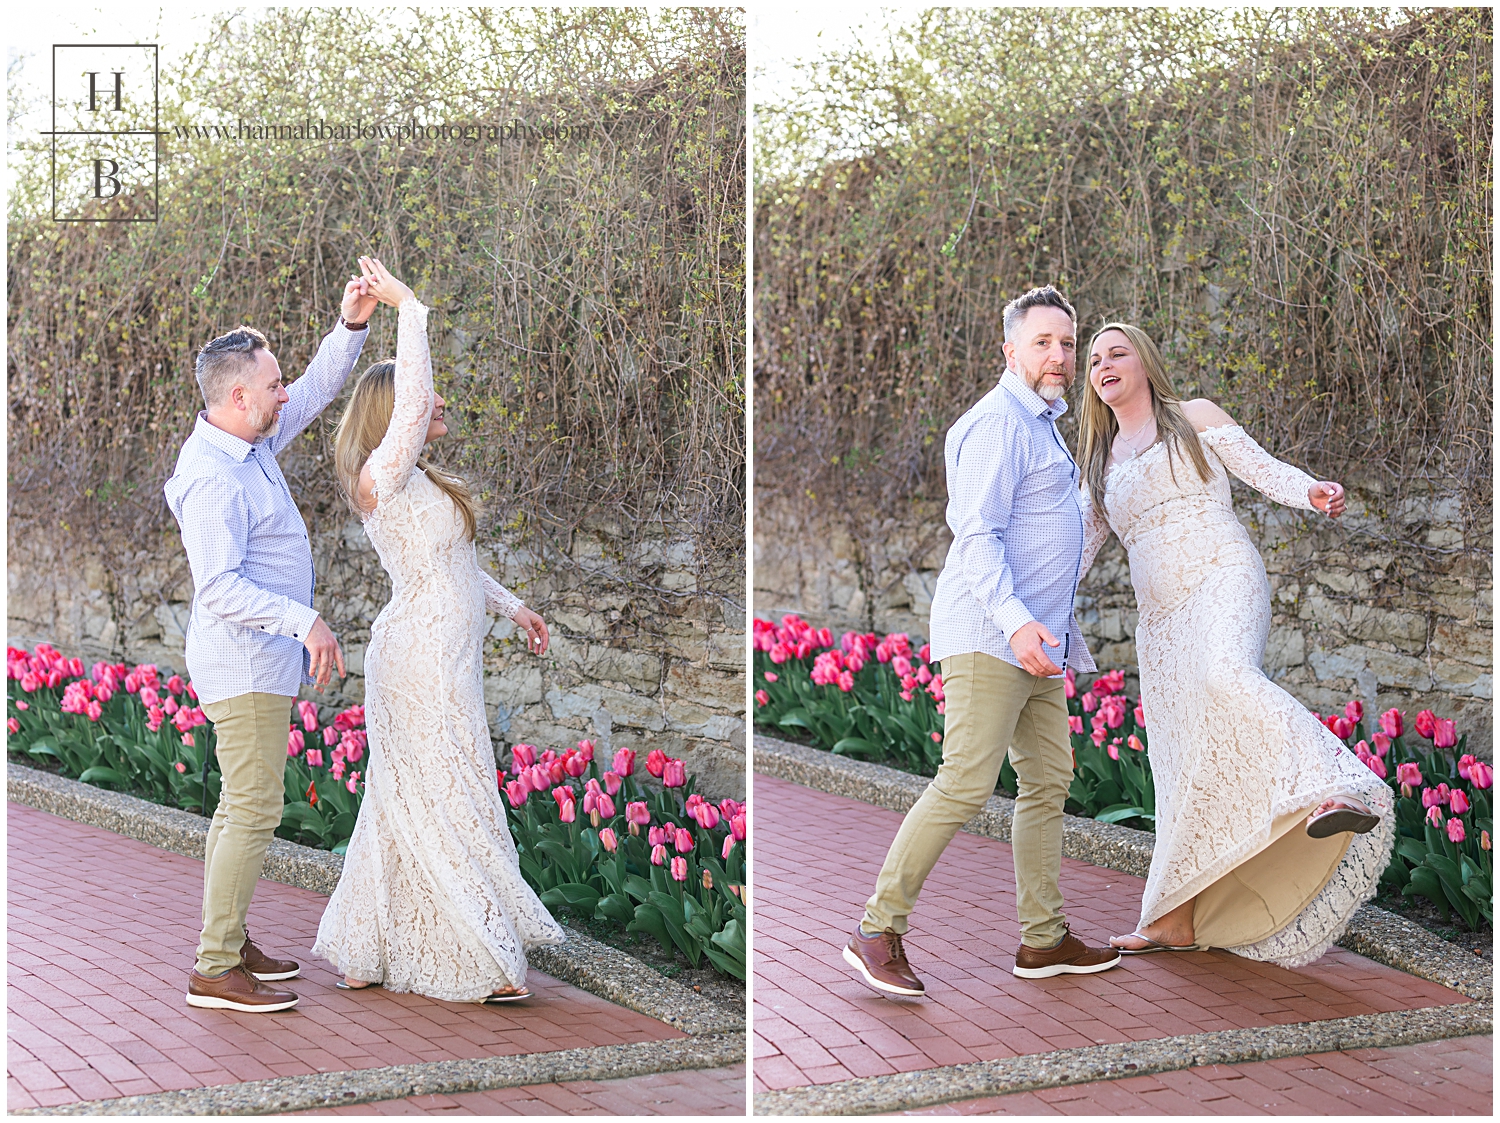 Outtakes of couple dancing and spinning by pink, tulip flower bed.